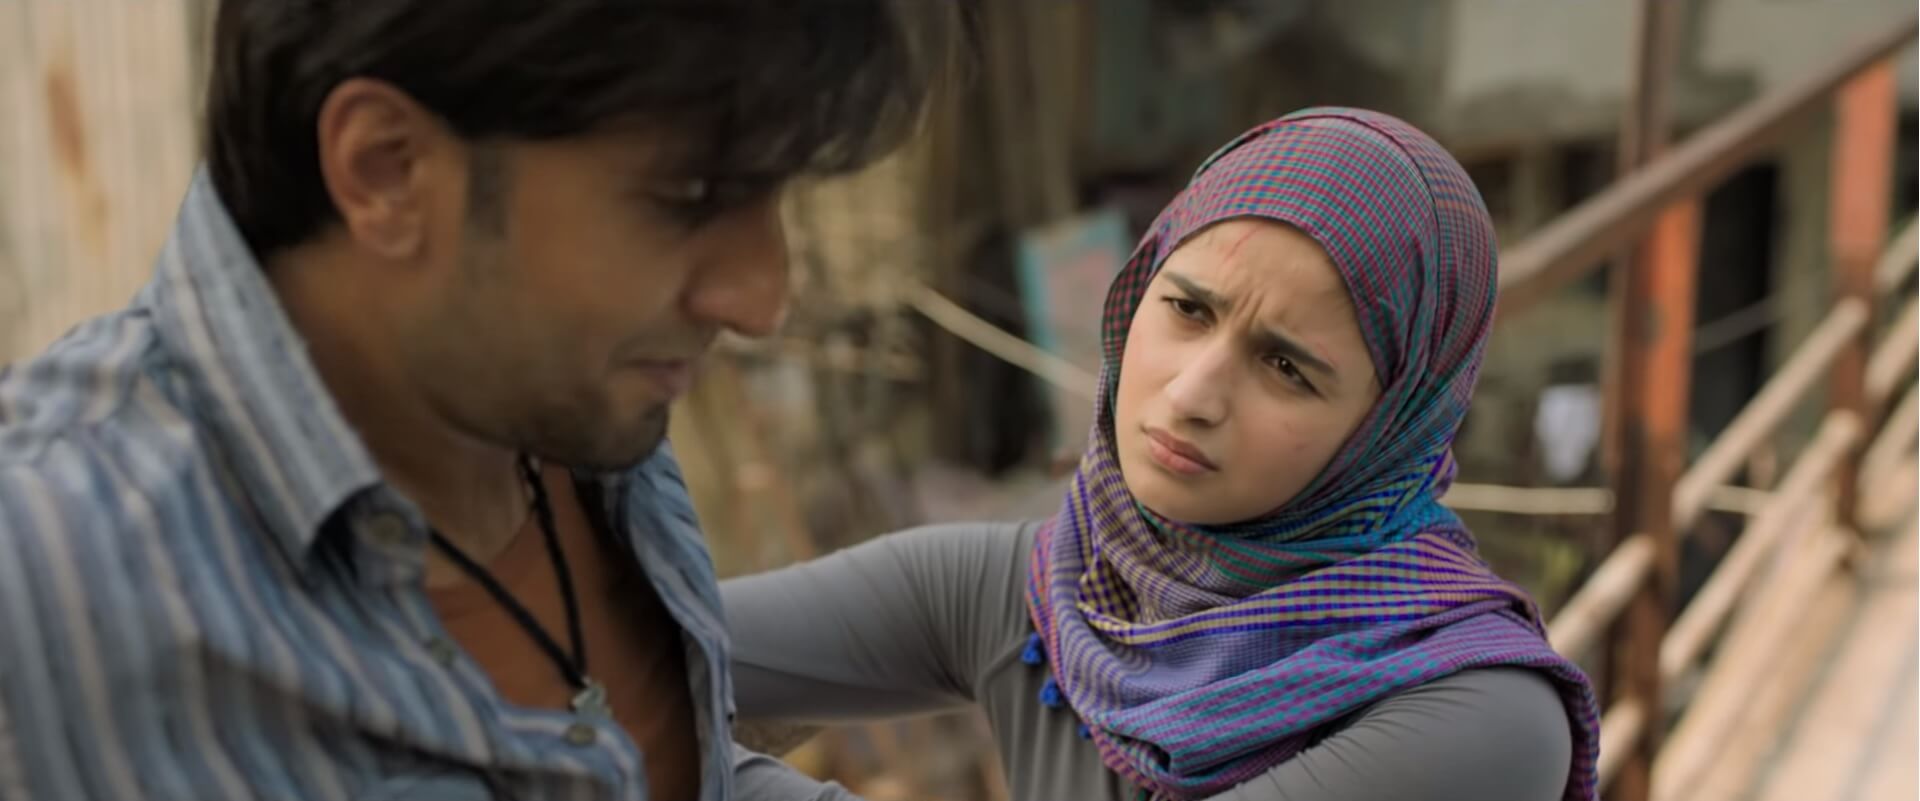 Download Gully Boy (2019) Full HD Movie - Working Download Links - Live ...